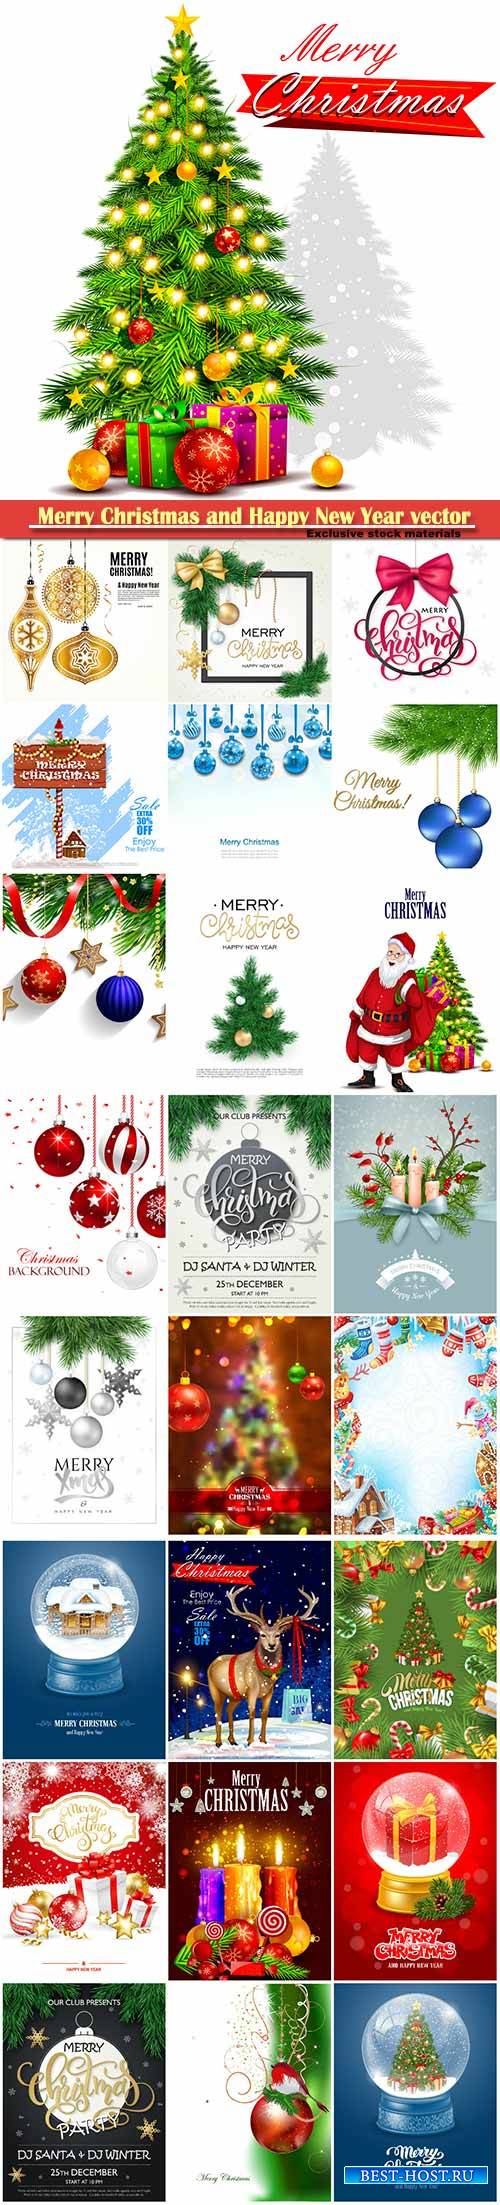 Merry Christmas and Happy New Year vector design # 33